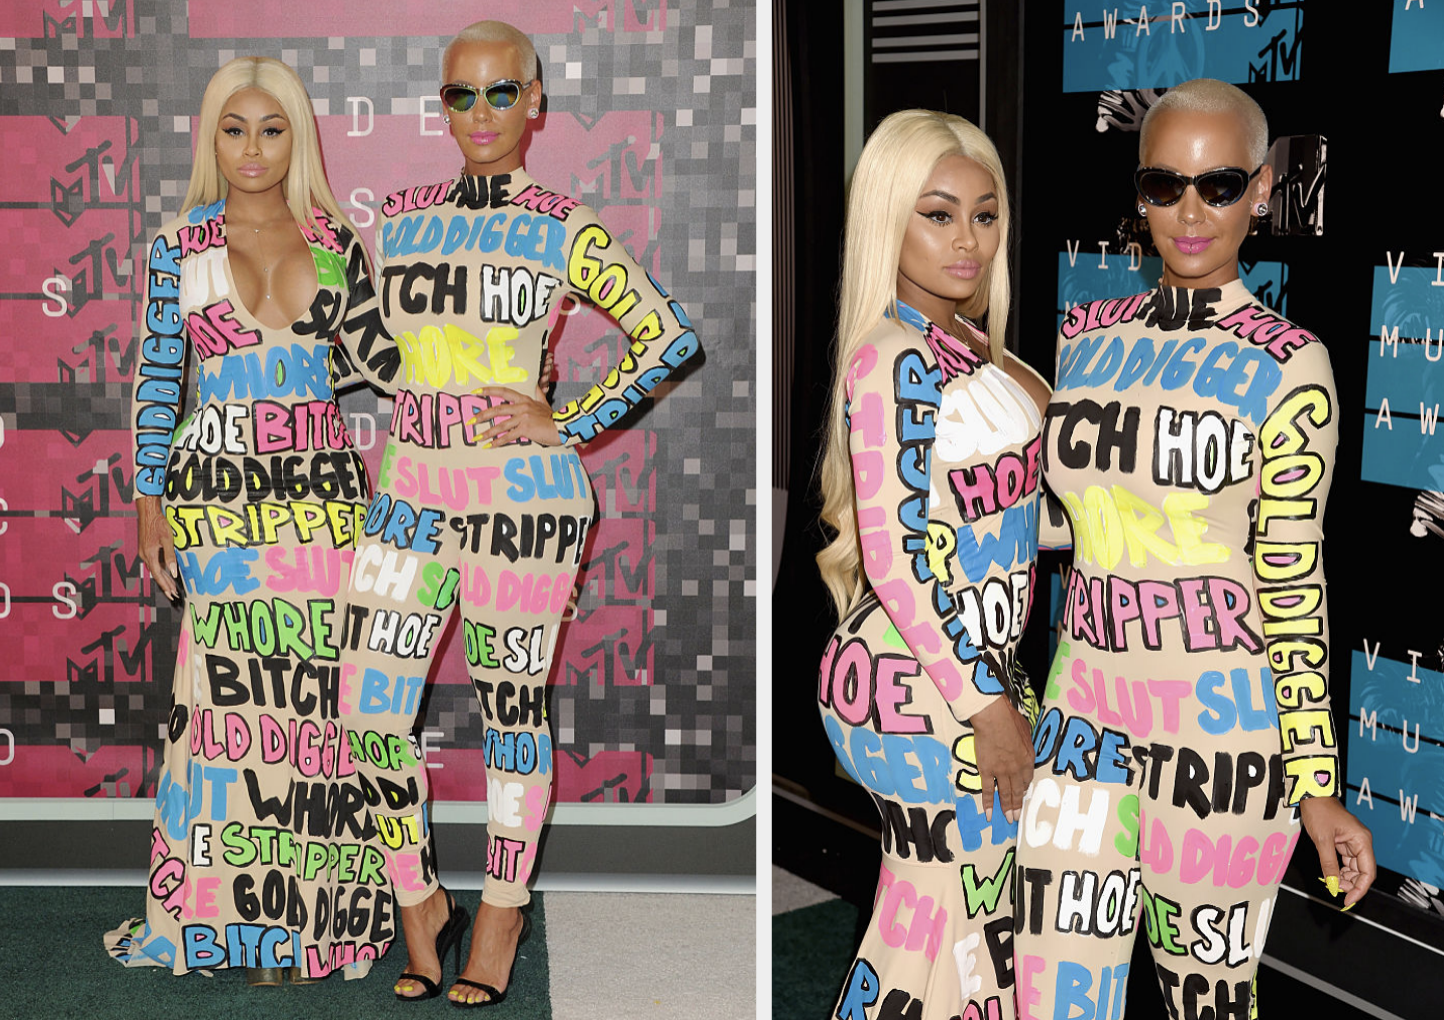 the two posing in the outfits that has words like bitch, gold digger and stripper